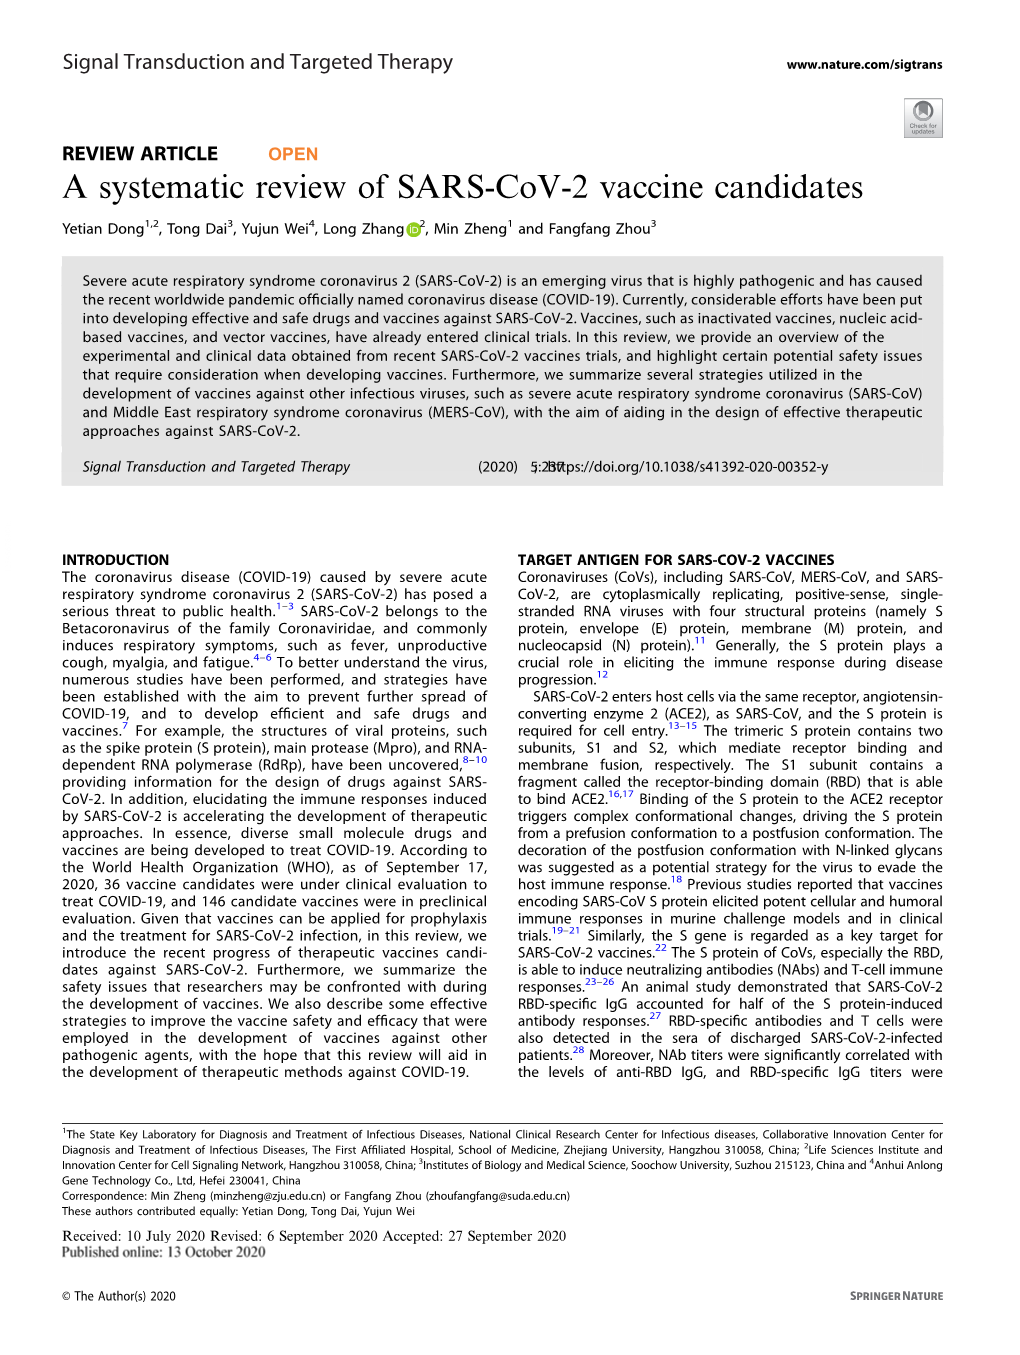 A Systematic Review of SARS-Cov-2 Vaccine Candidates